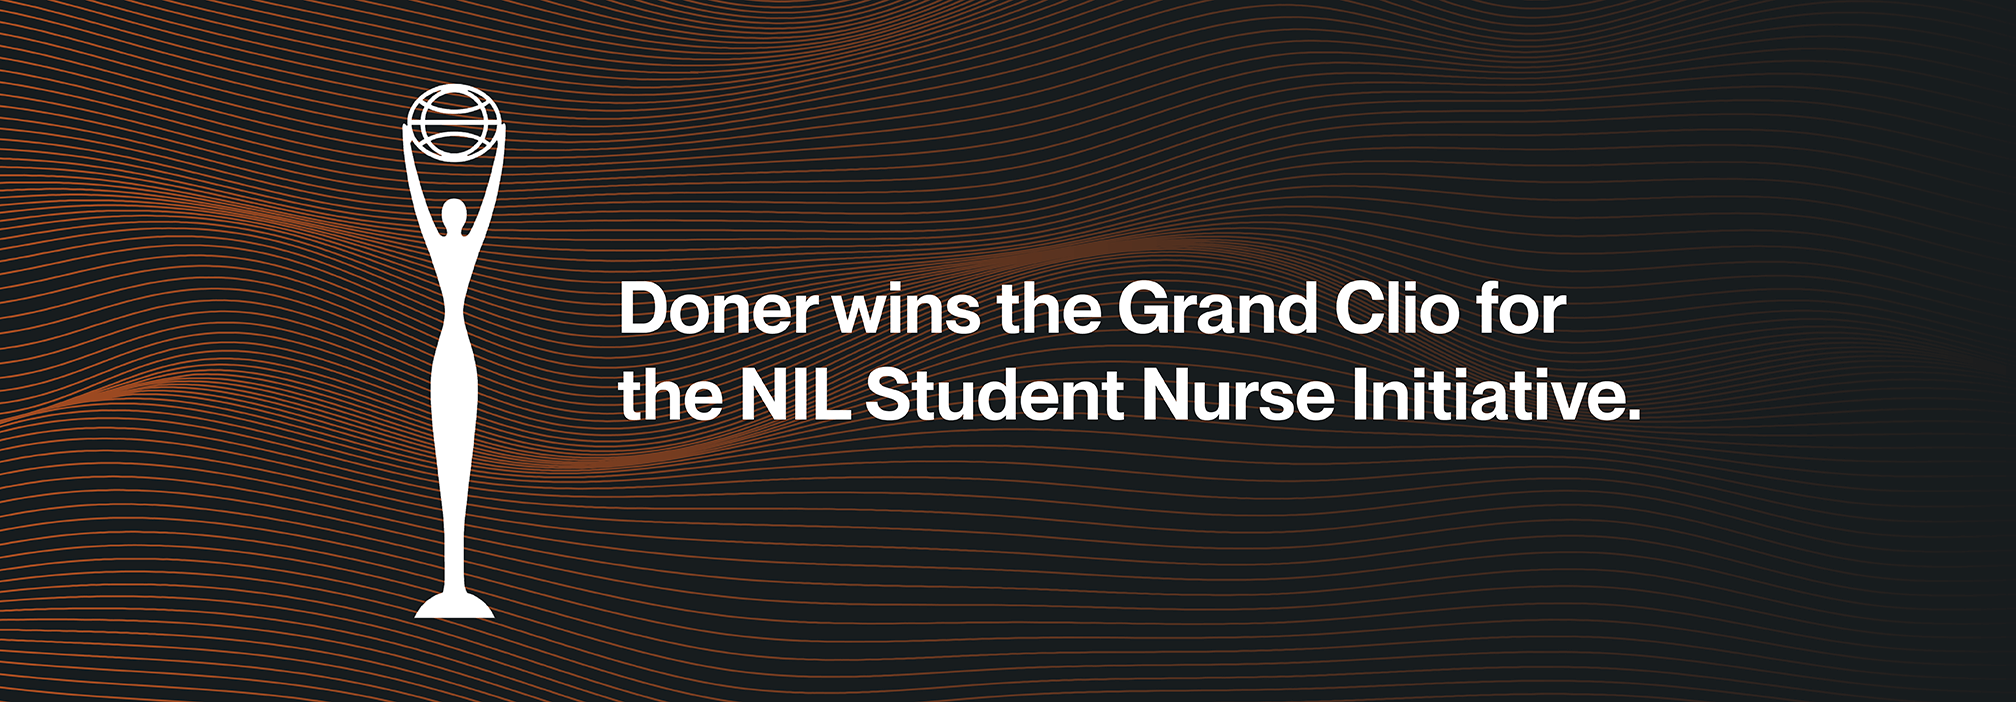 Doner wins the Grand Clio for the NIL Student Nurse Initiative